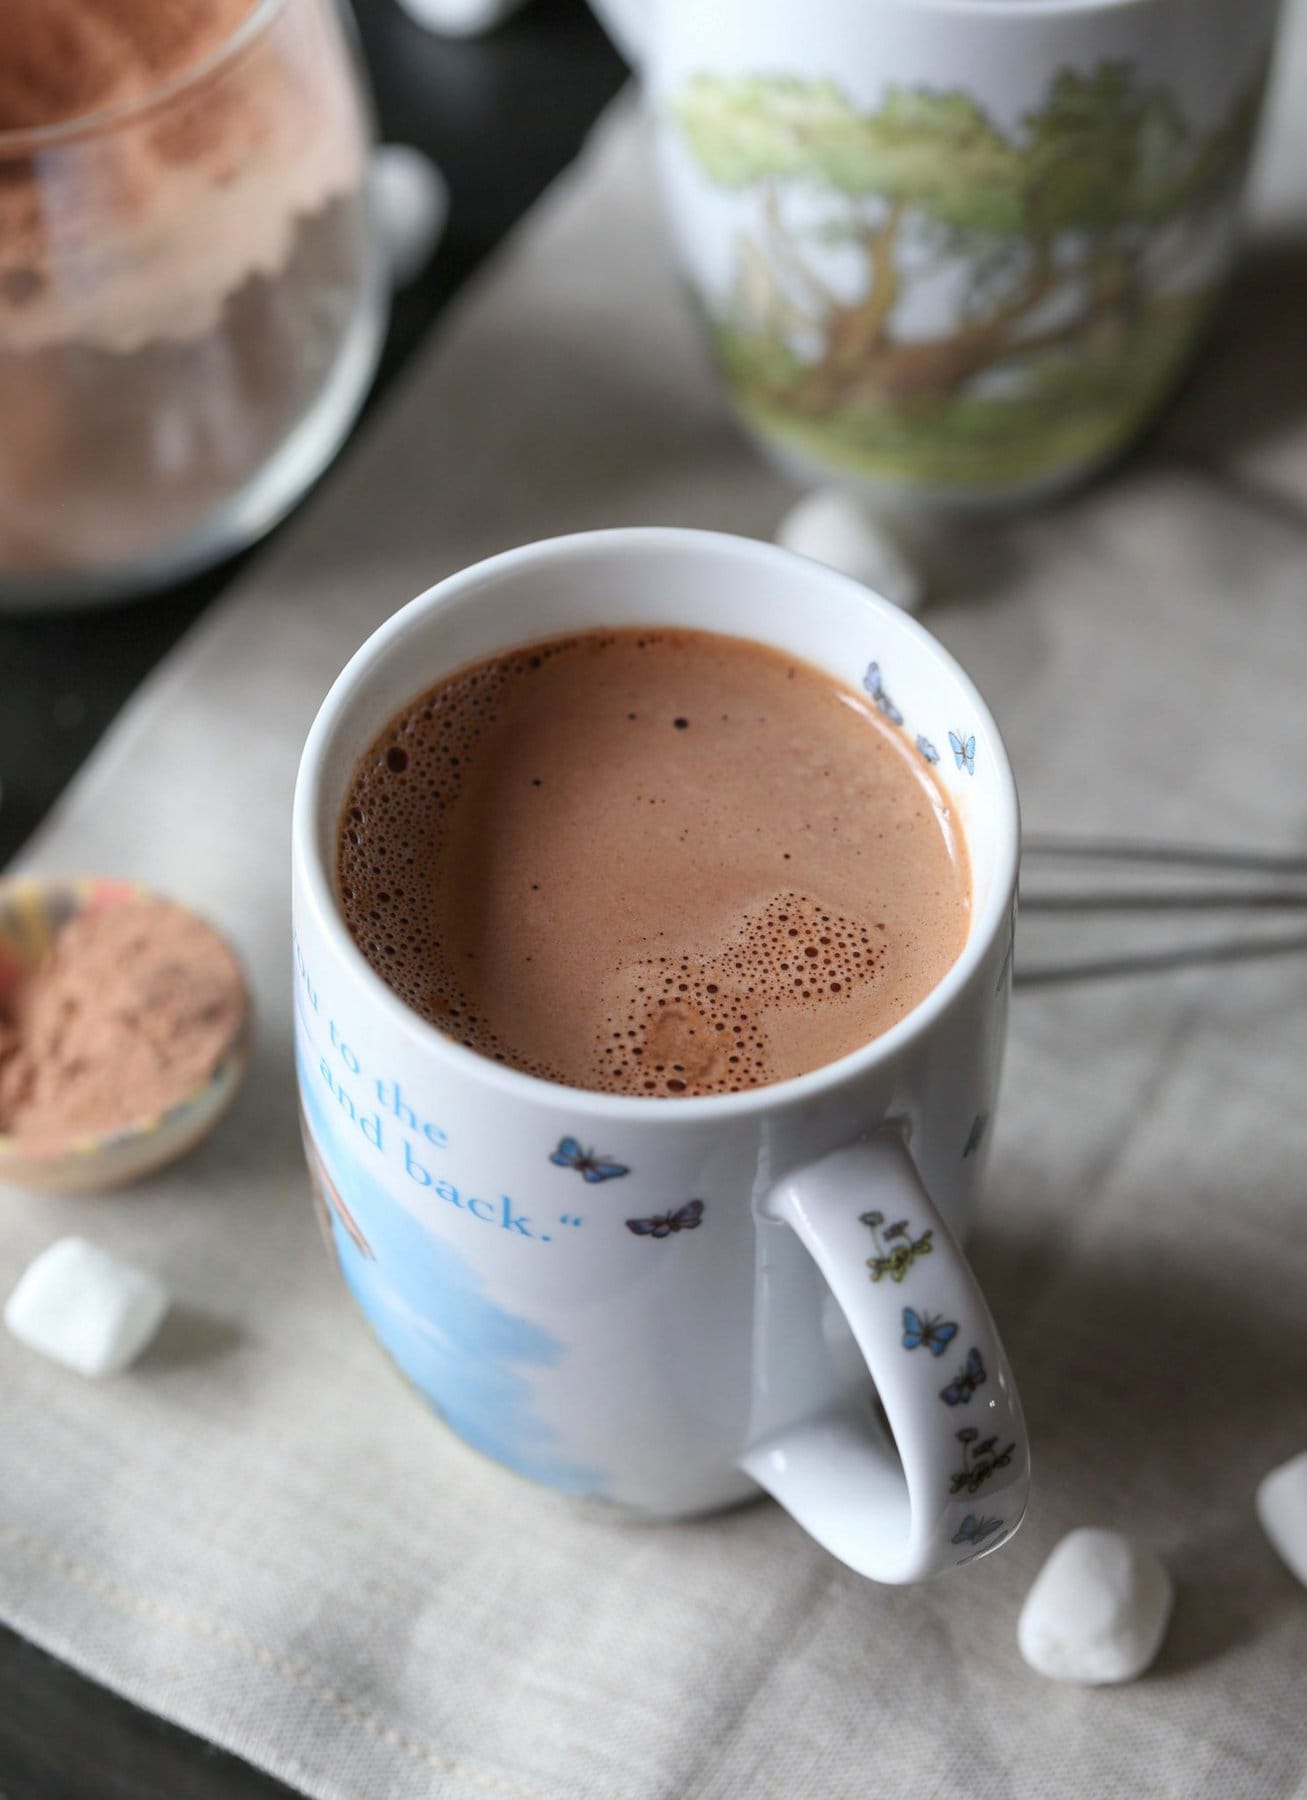 A mug of homemade hot chocolate next to scattered mini marshmallows and a jar of hot cocoa mix.